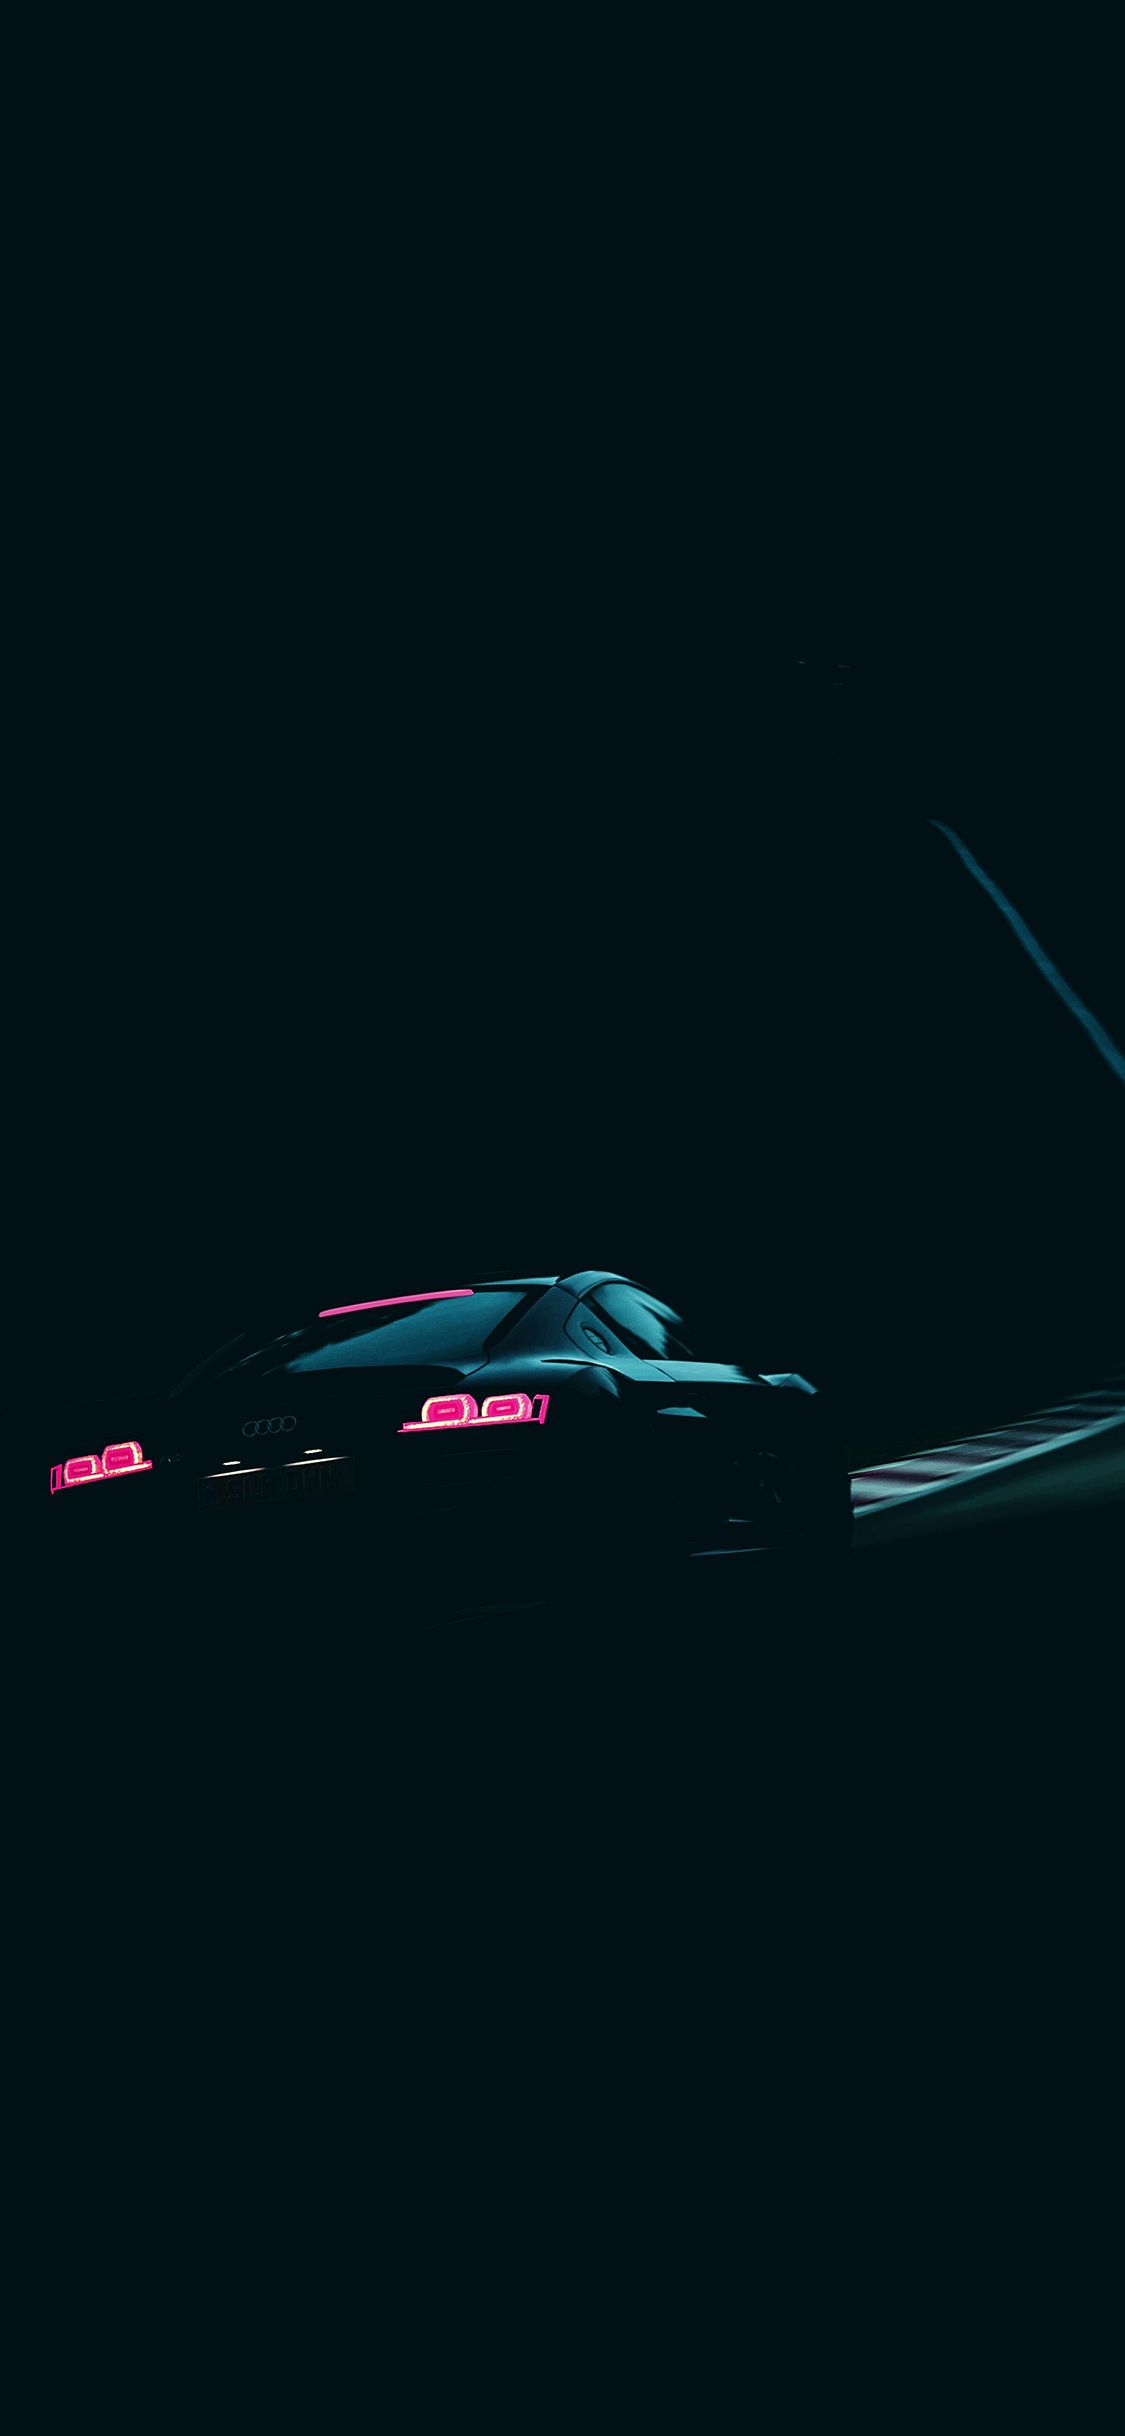 Cars Wallpaper For iPhone X iPhonexpapers Wallpaper For iPhone Xs Max